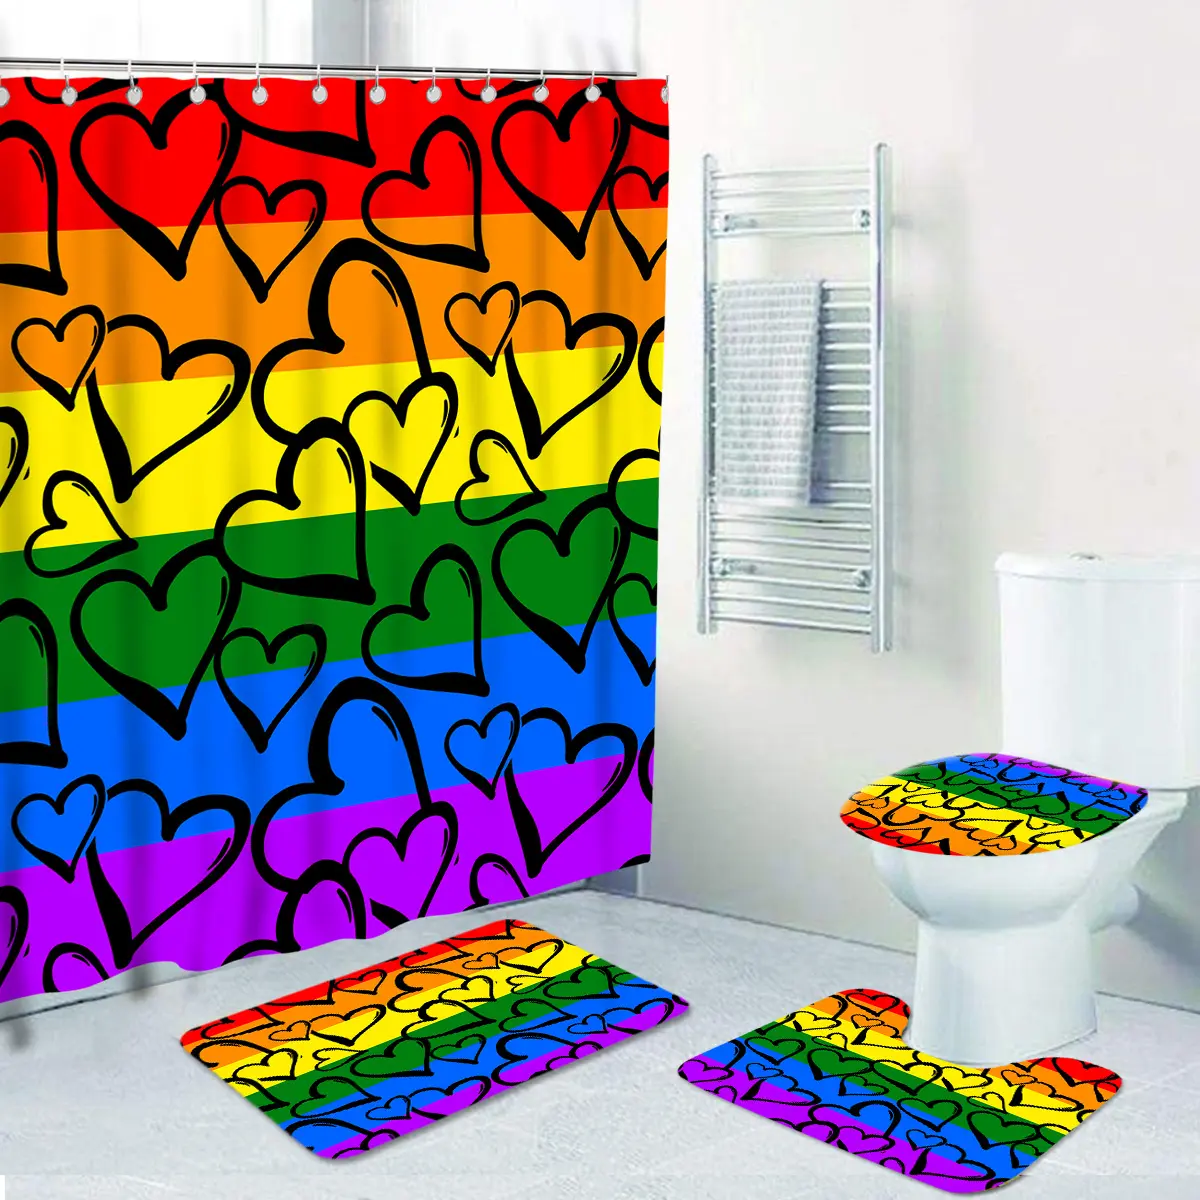 5piece love is love color Rainbow Anime Picture 100% Polyester Waterproof Bathroom Bath Set Shower Curtain And Rug Set